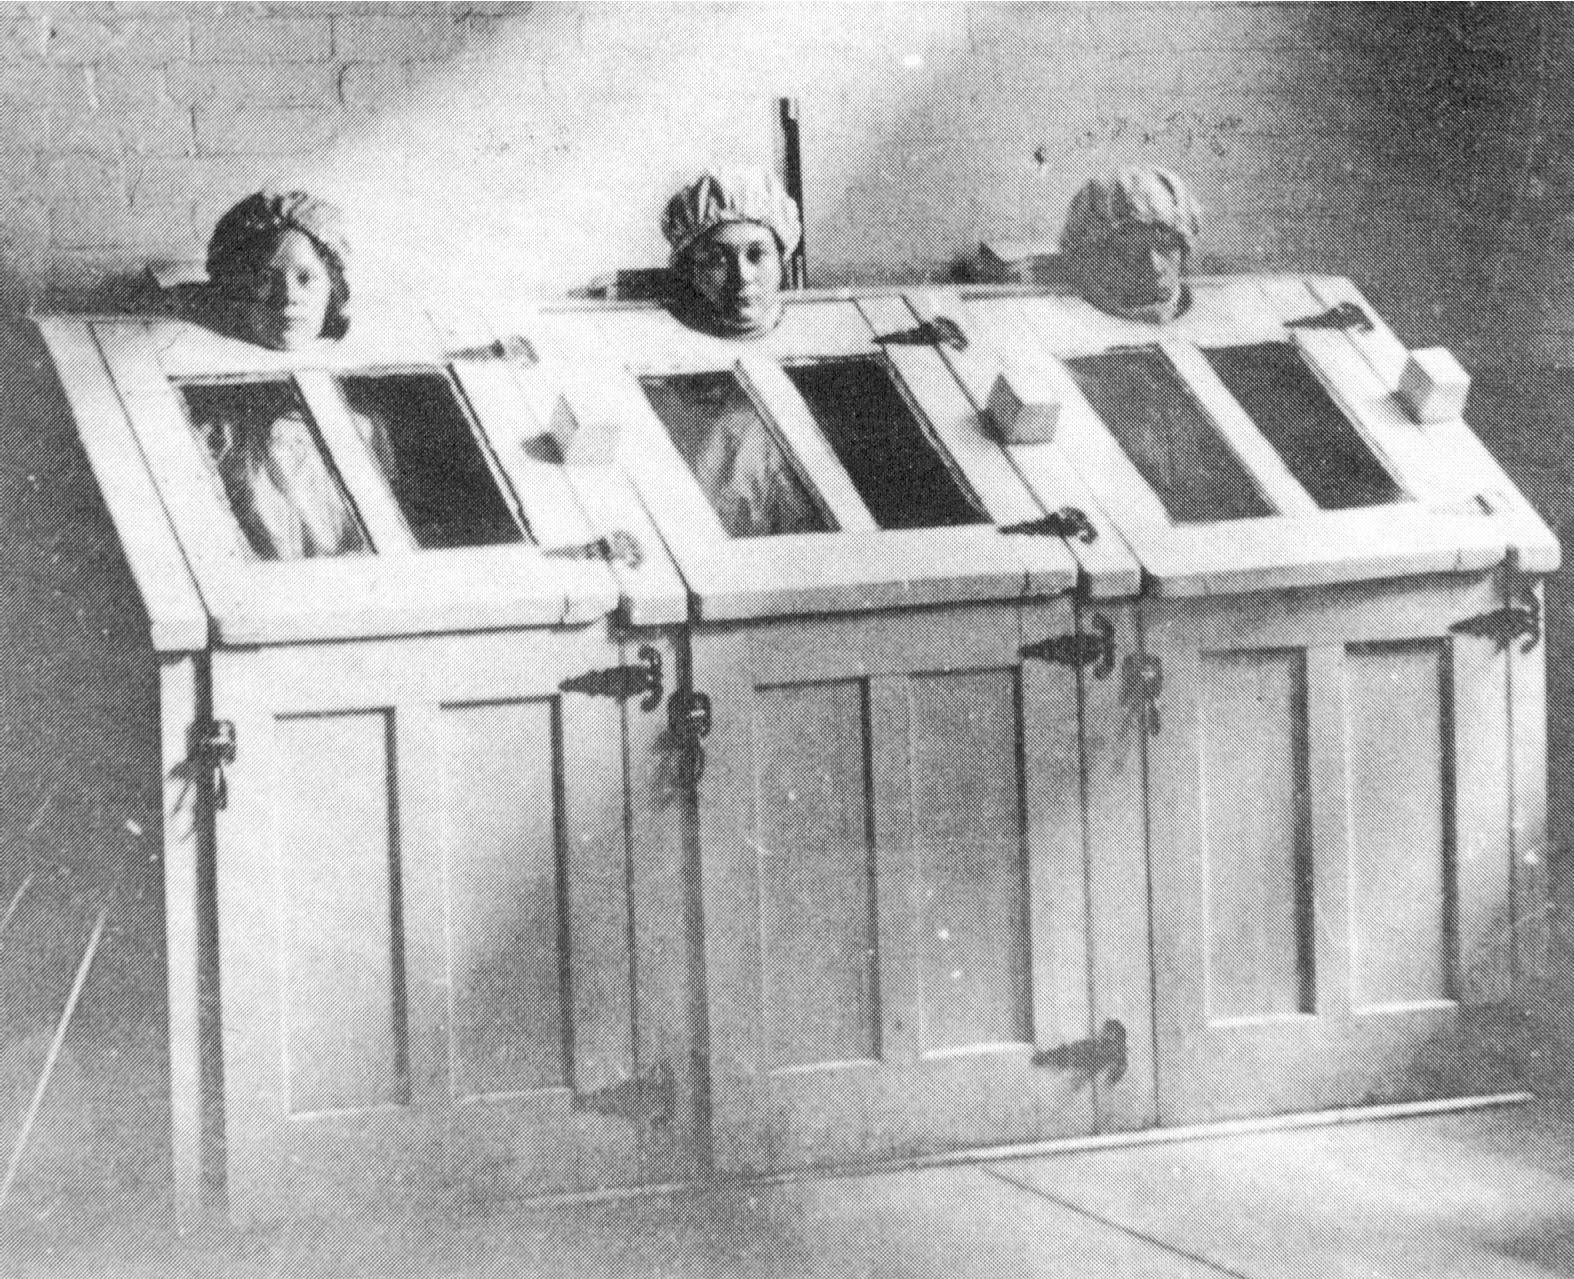 Patients in steam cabinets, c 1910.